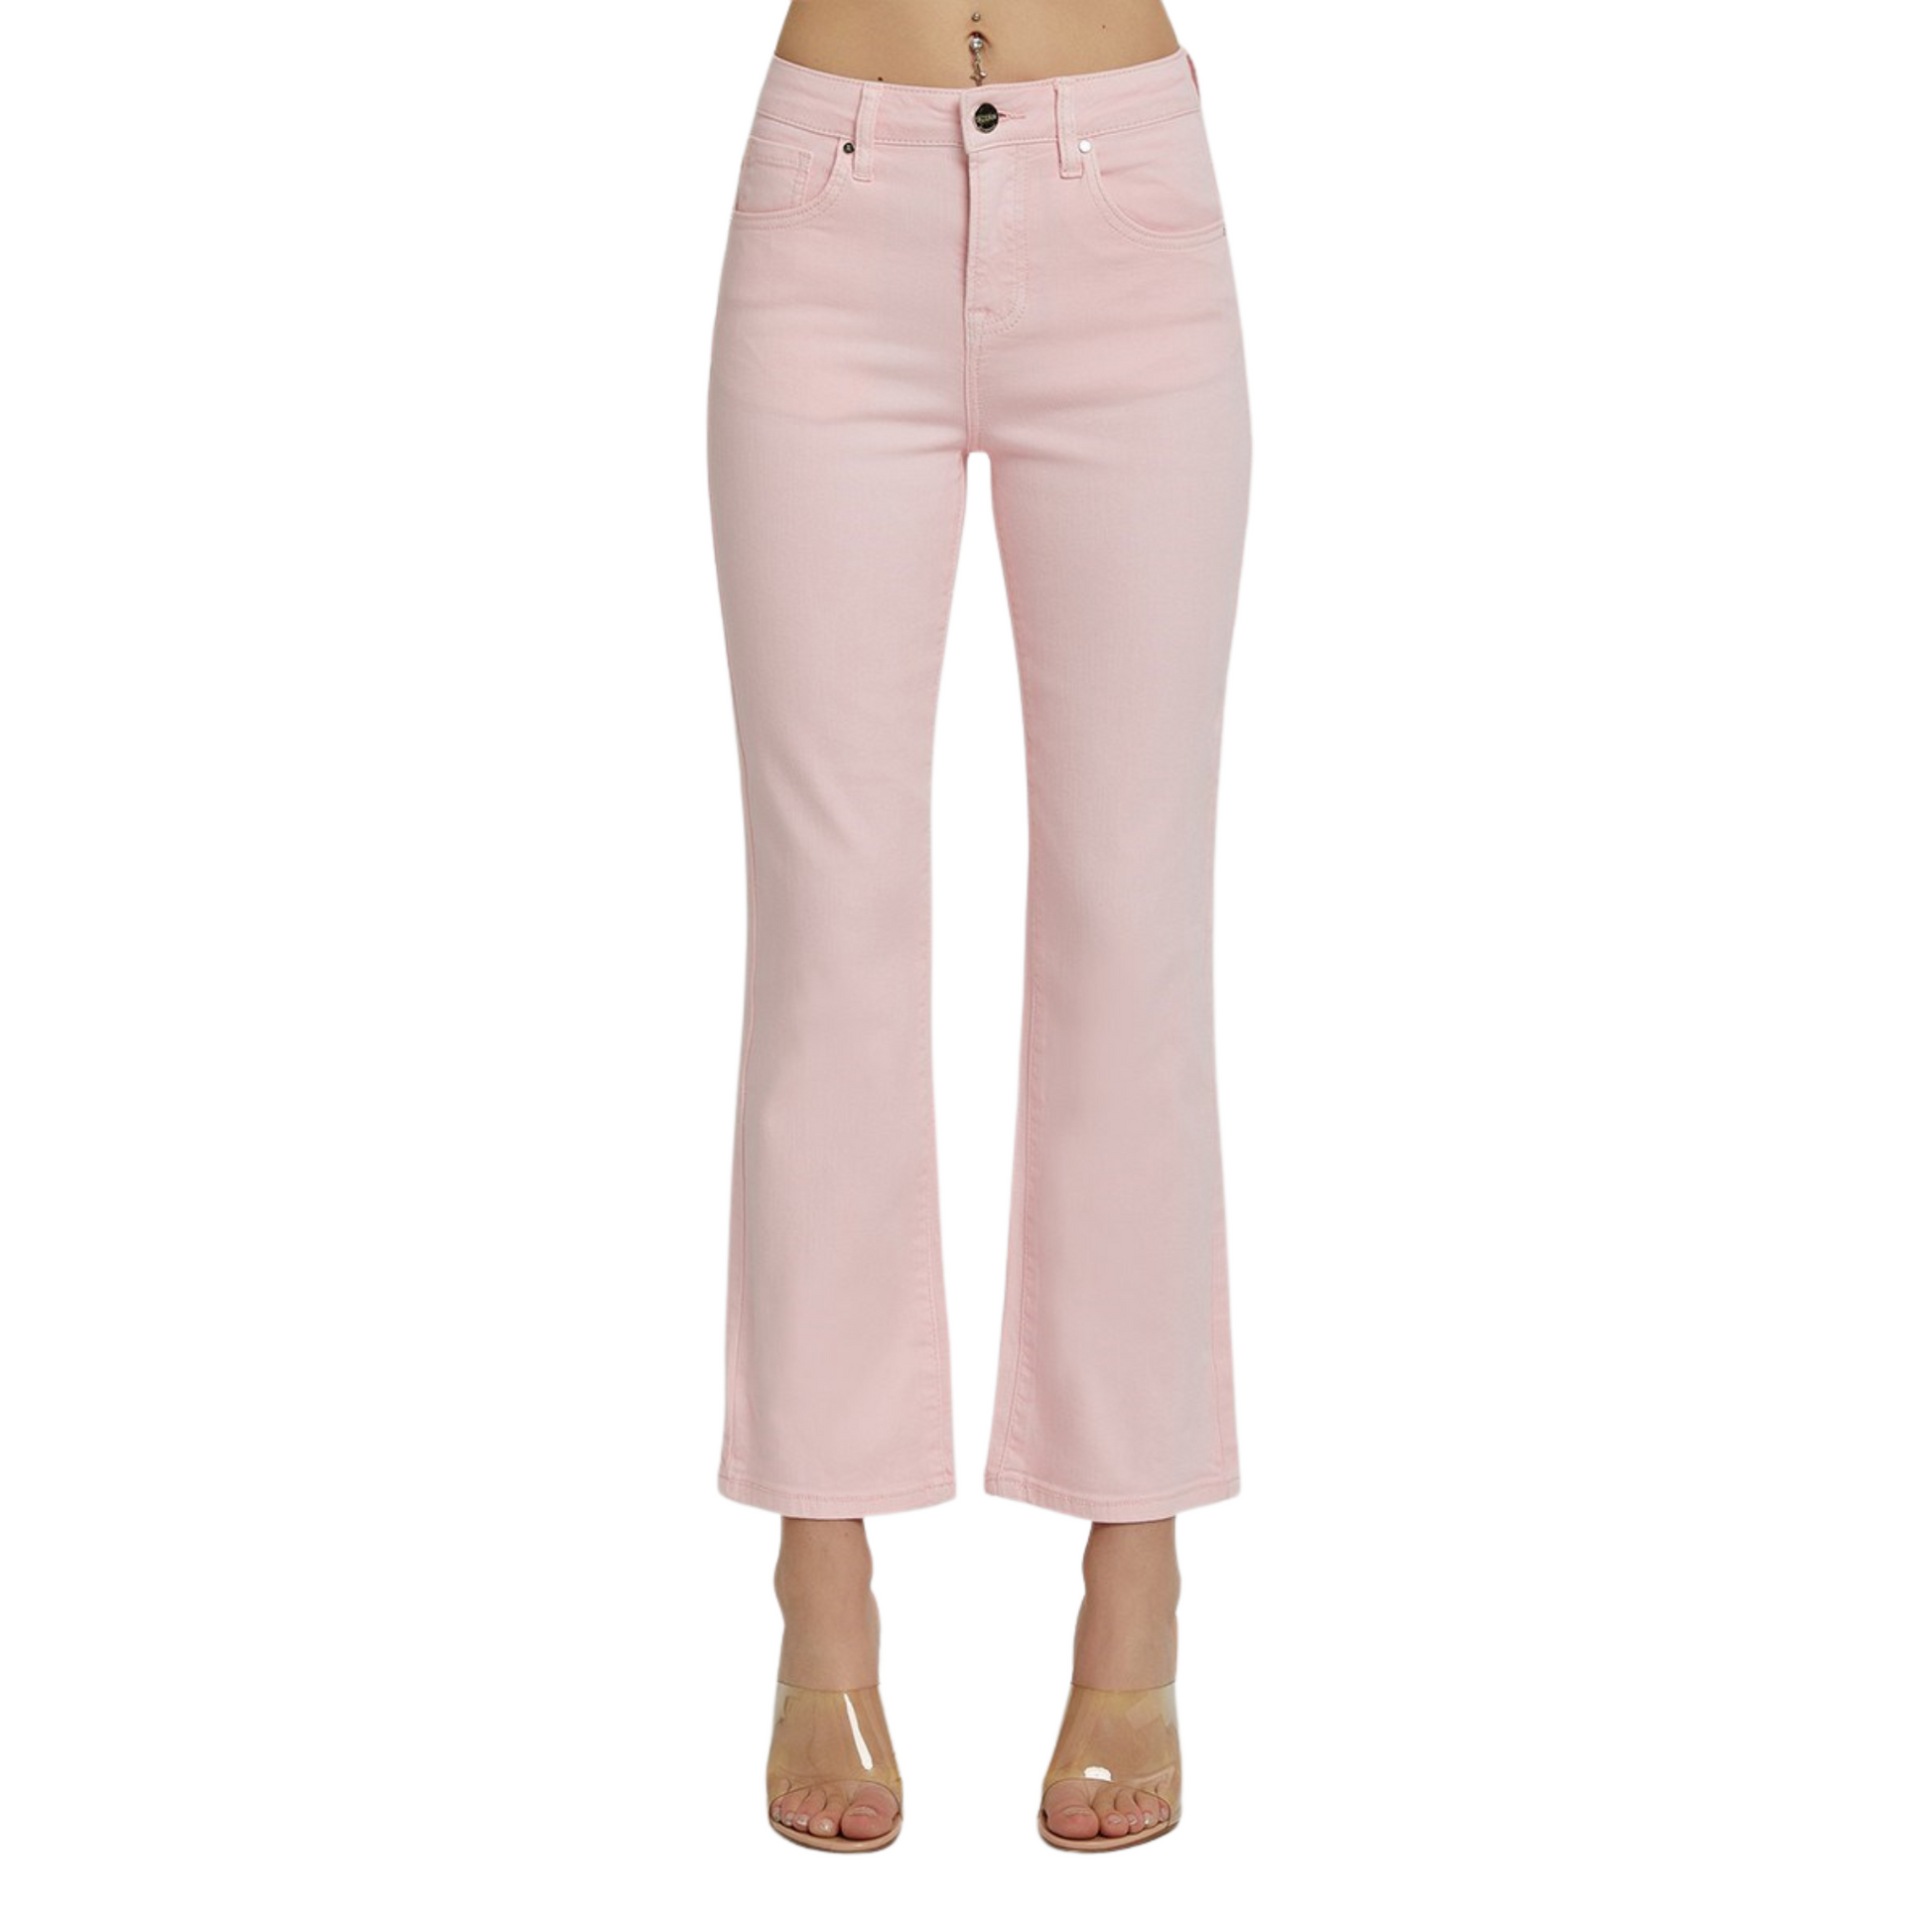 These Mid Rise Straight Jeans in a soft pink color from the Risen brand offer a comfortable mid rise fit and a classic straight leg design. Perfect for everyday wear, these jeans provide a flattering silhouette and stylish versatility.